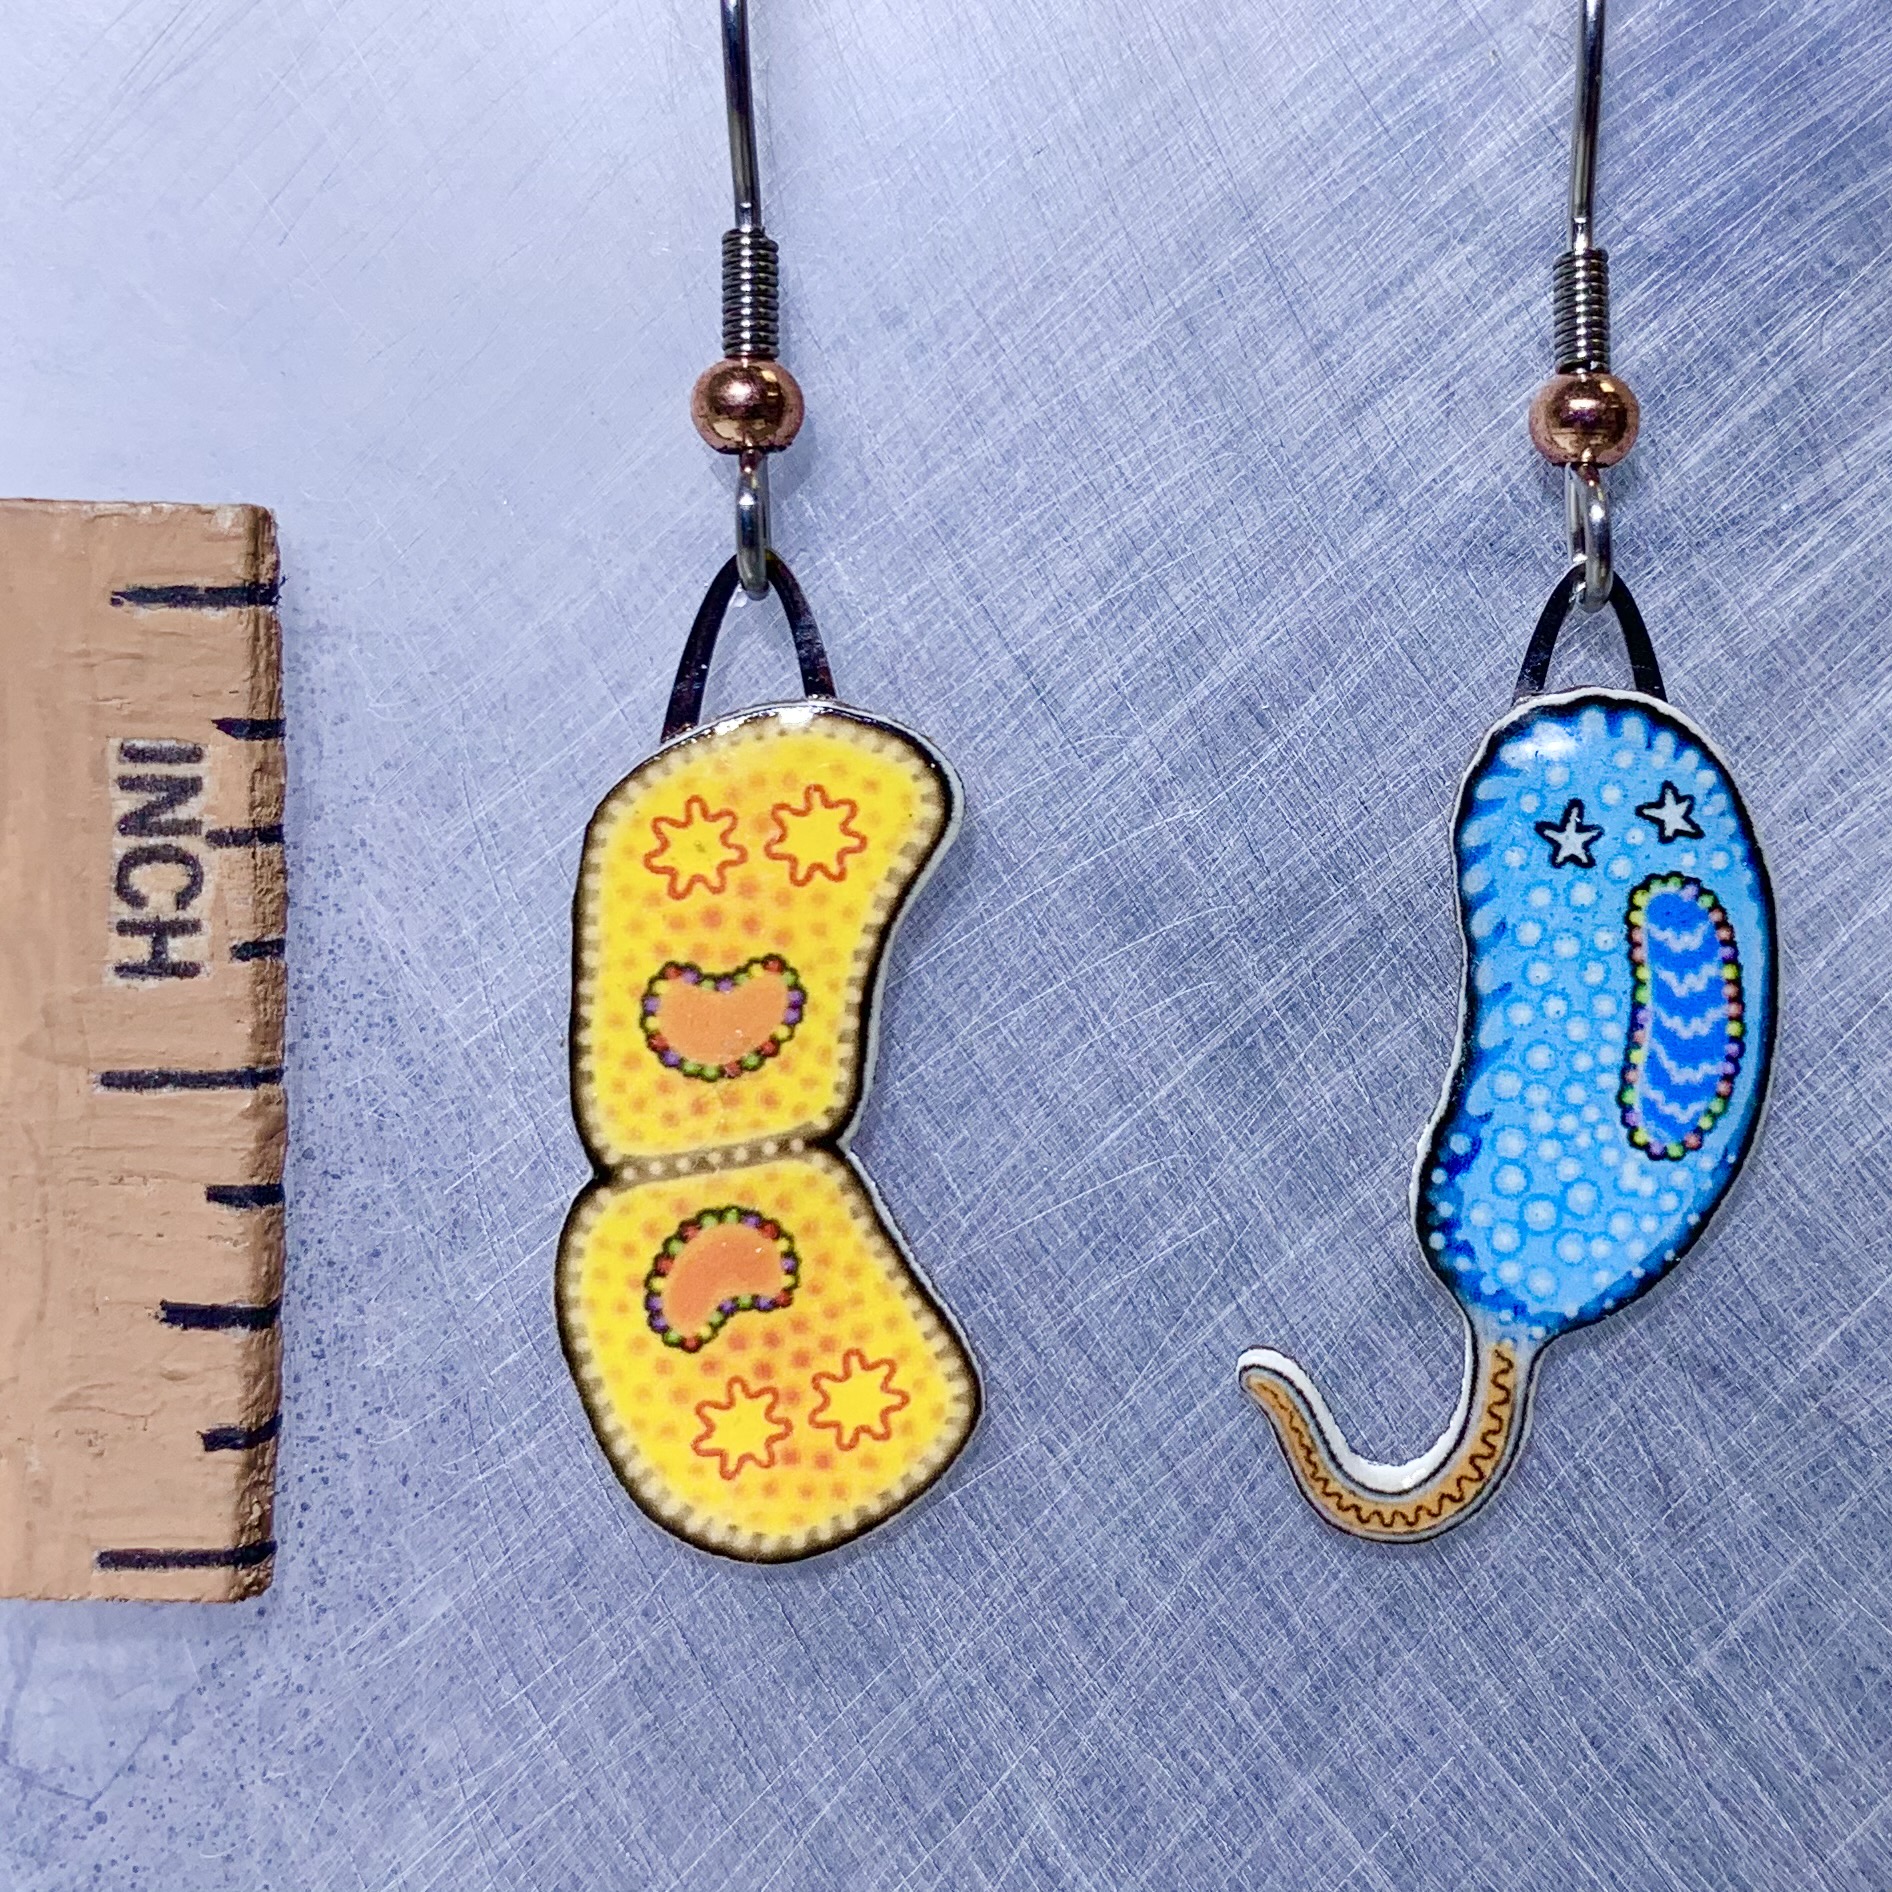 Picture shown is of 1 inch tall pair of earrings of Extremophiles.